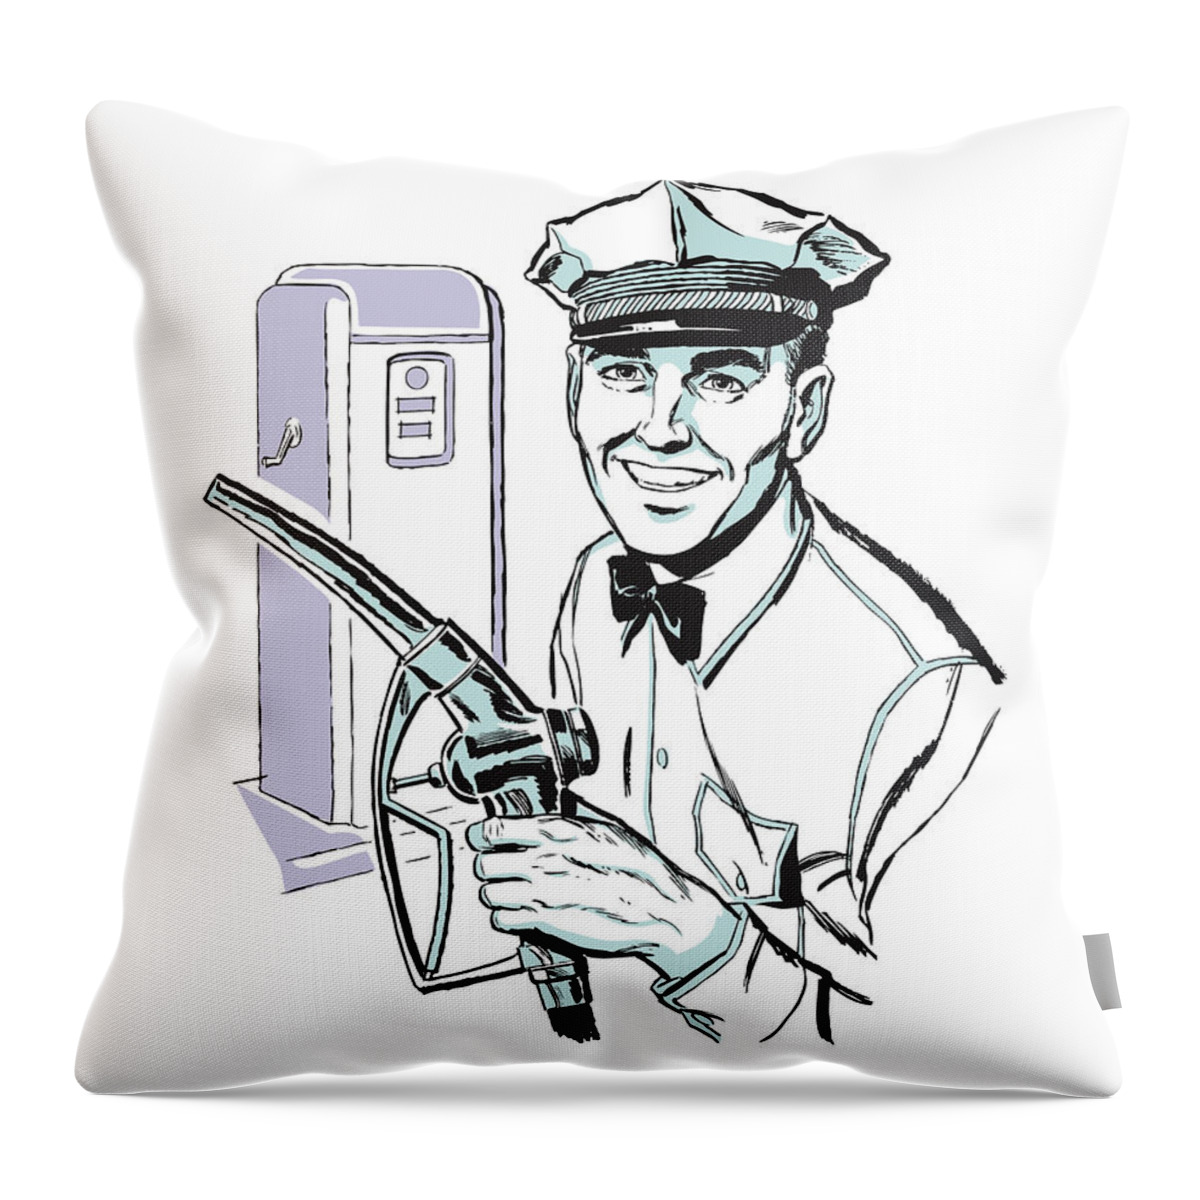 Accessories Throw Pillow featuring the drawing Smiling Male Gas Station Attendant by CSA Images